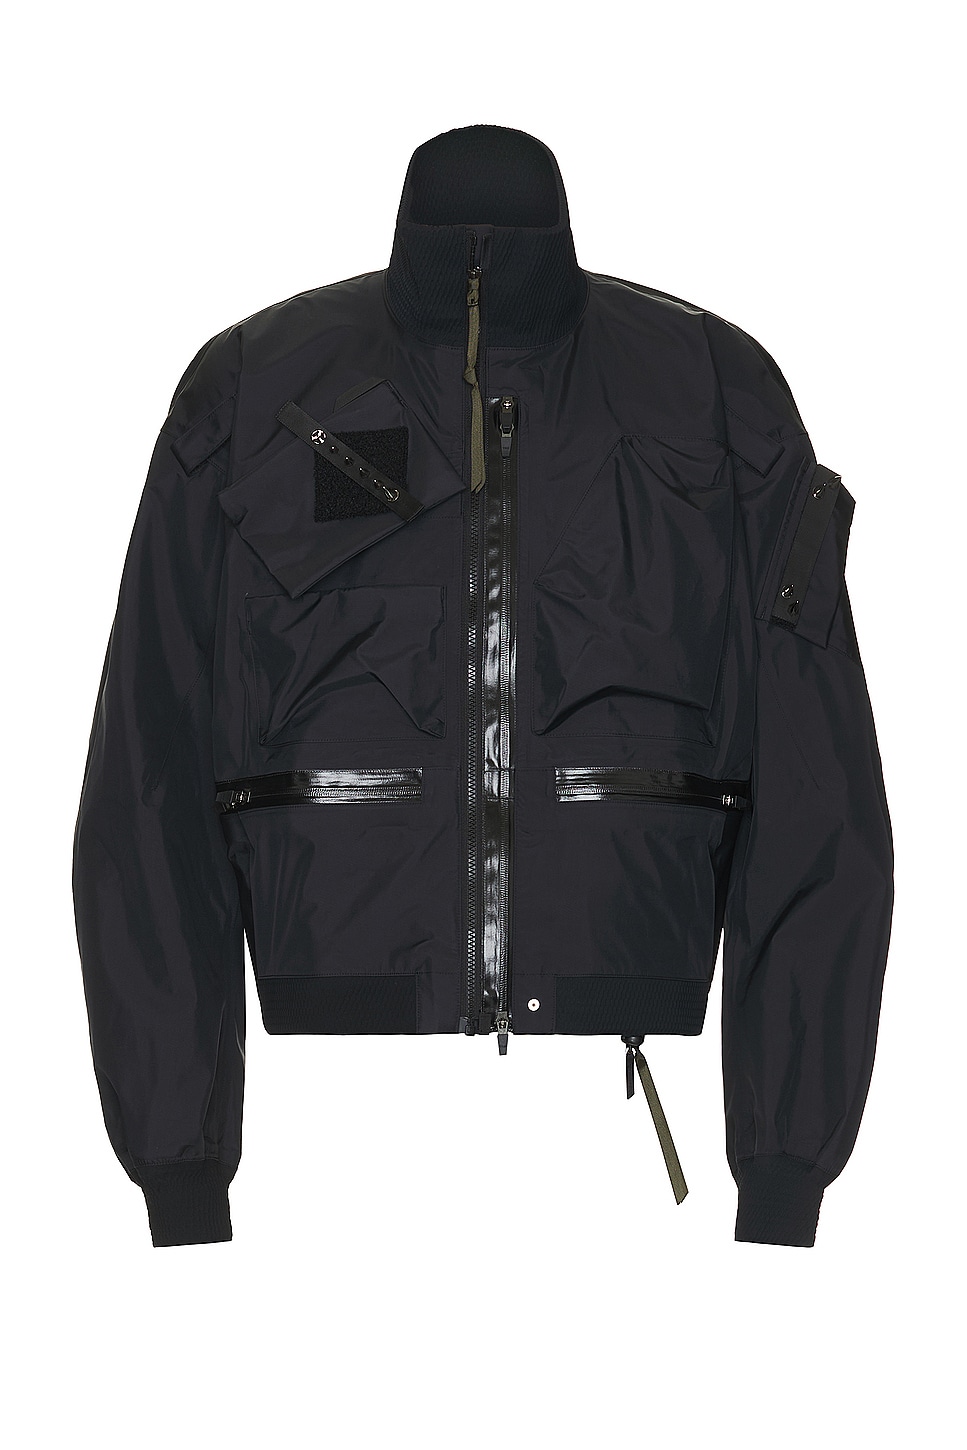 Image 1 of Acronym J123A-GT 3l Gore-tex Interops Jacket in Black